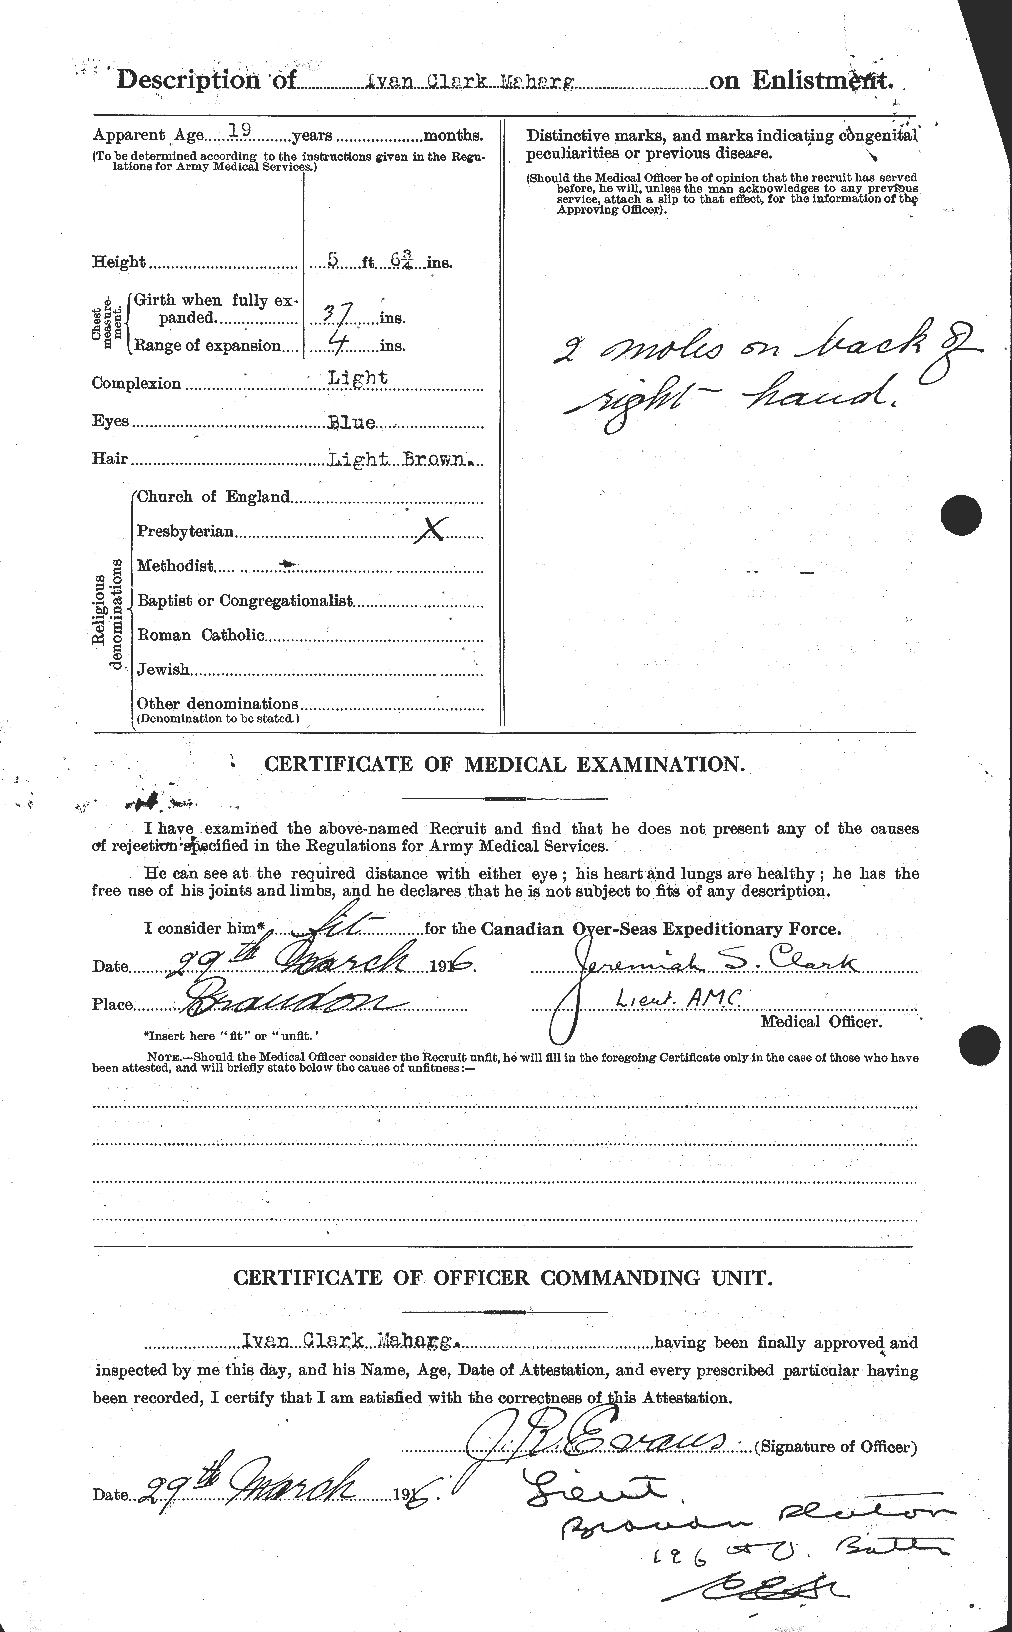 Personnel Records of the First World War - CEF 481957b